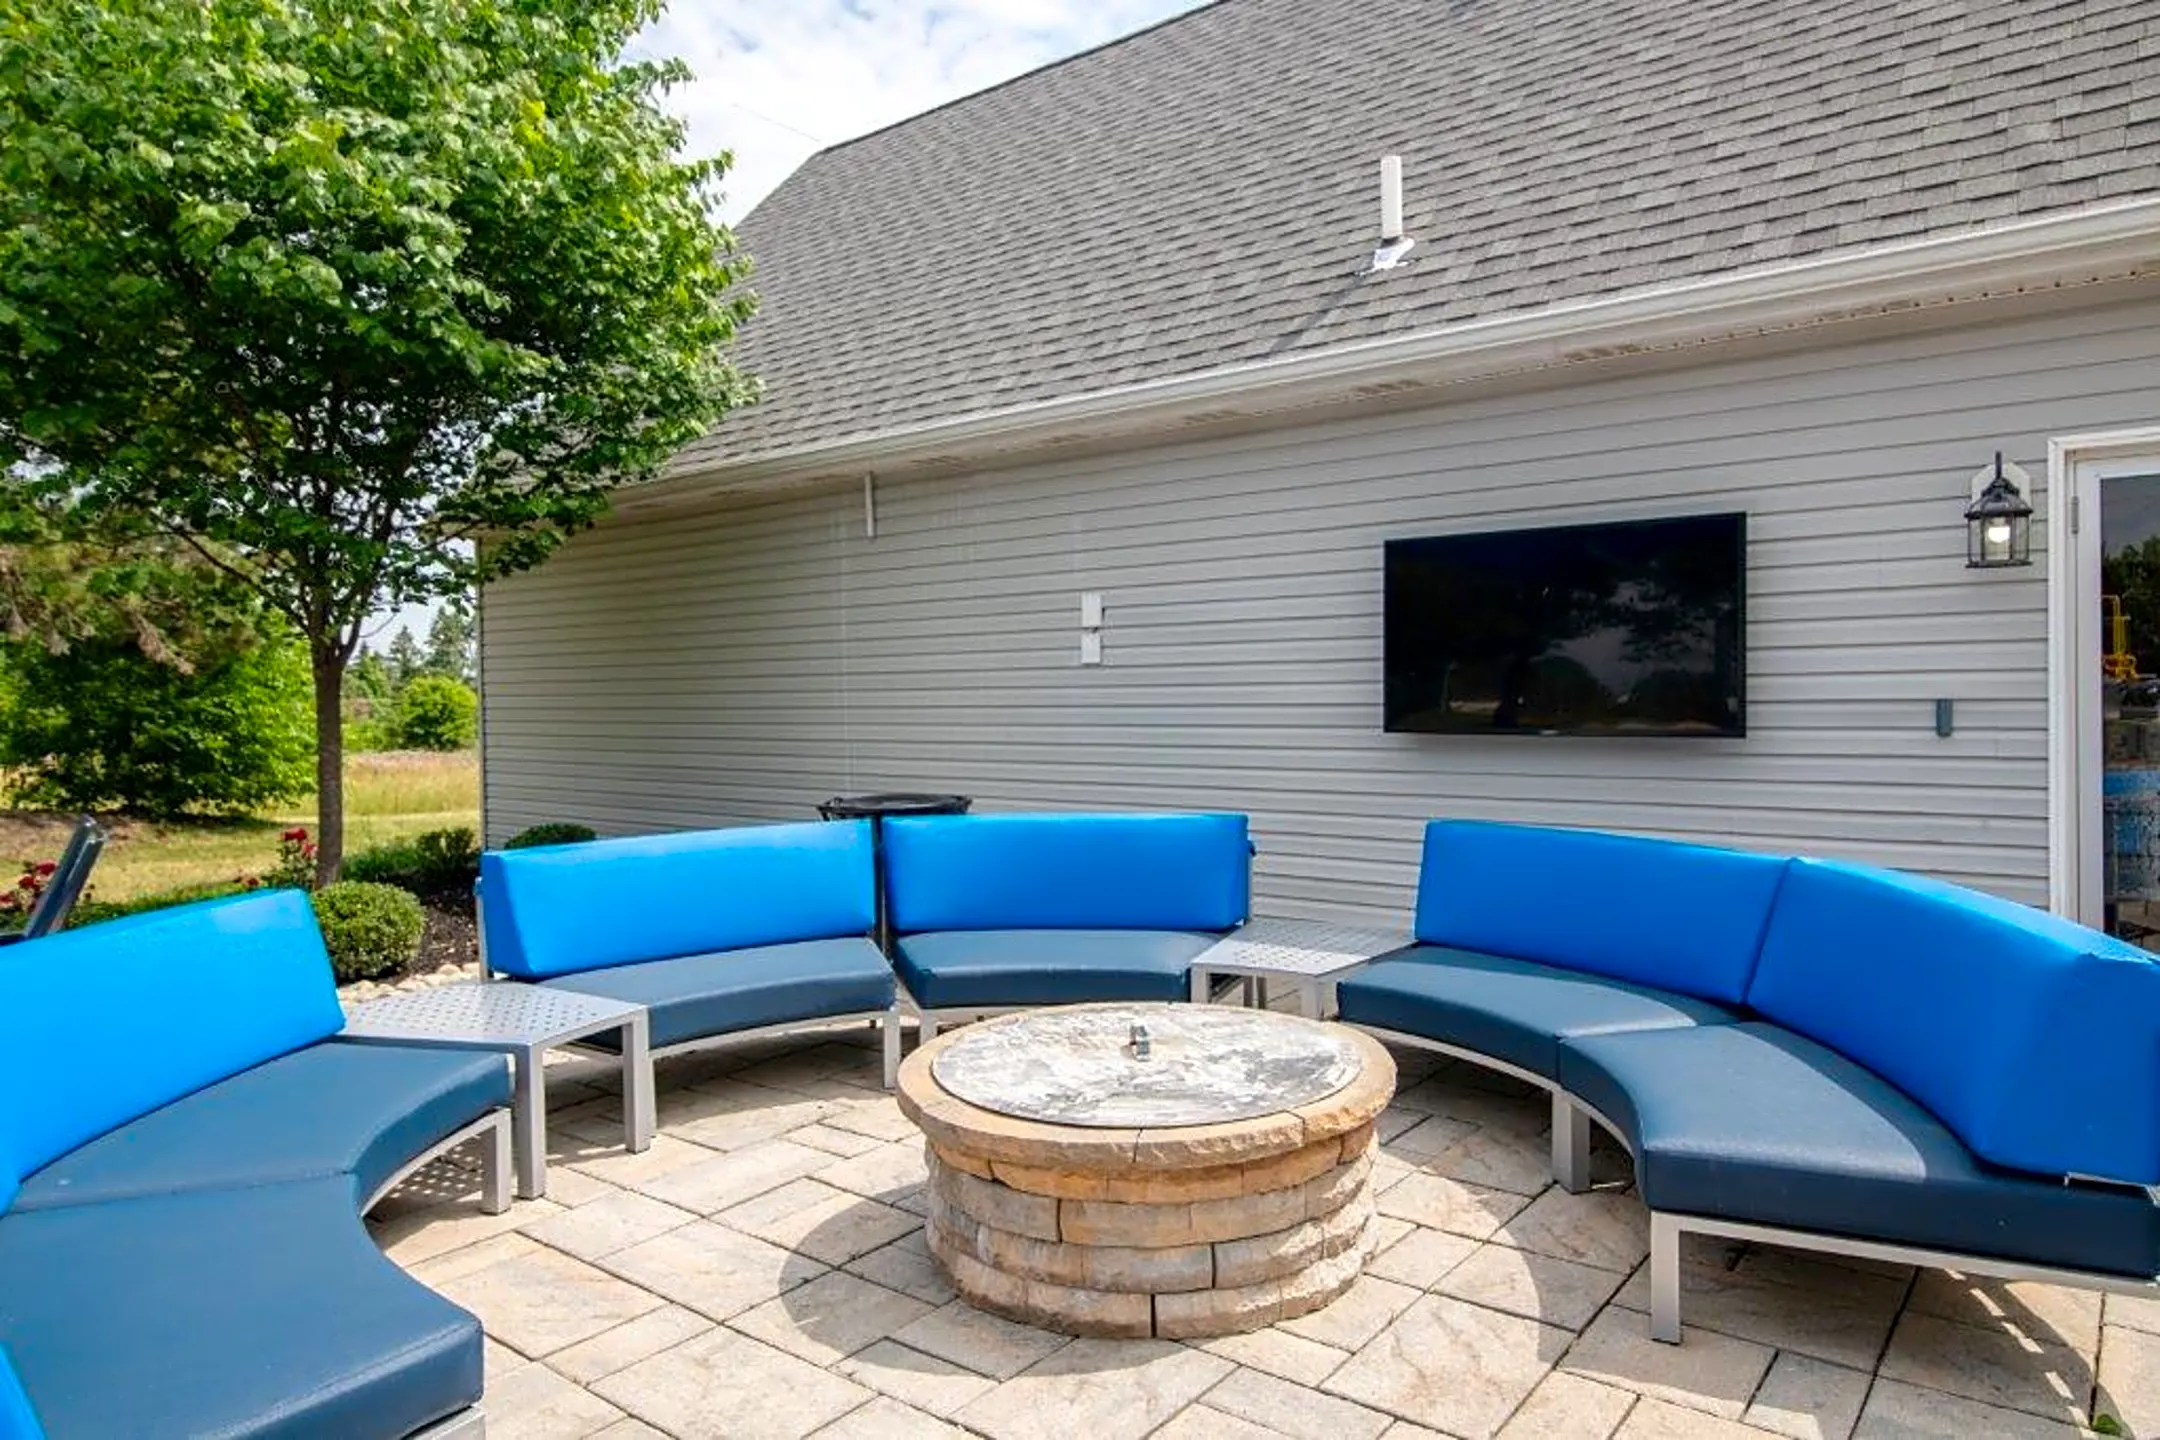 Patio / Deck - Abrams Run Apartment Homes - King of Prussia, PA